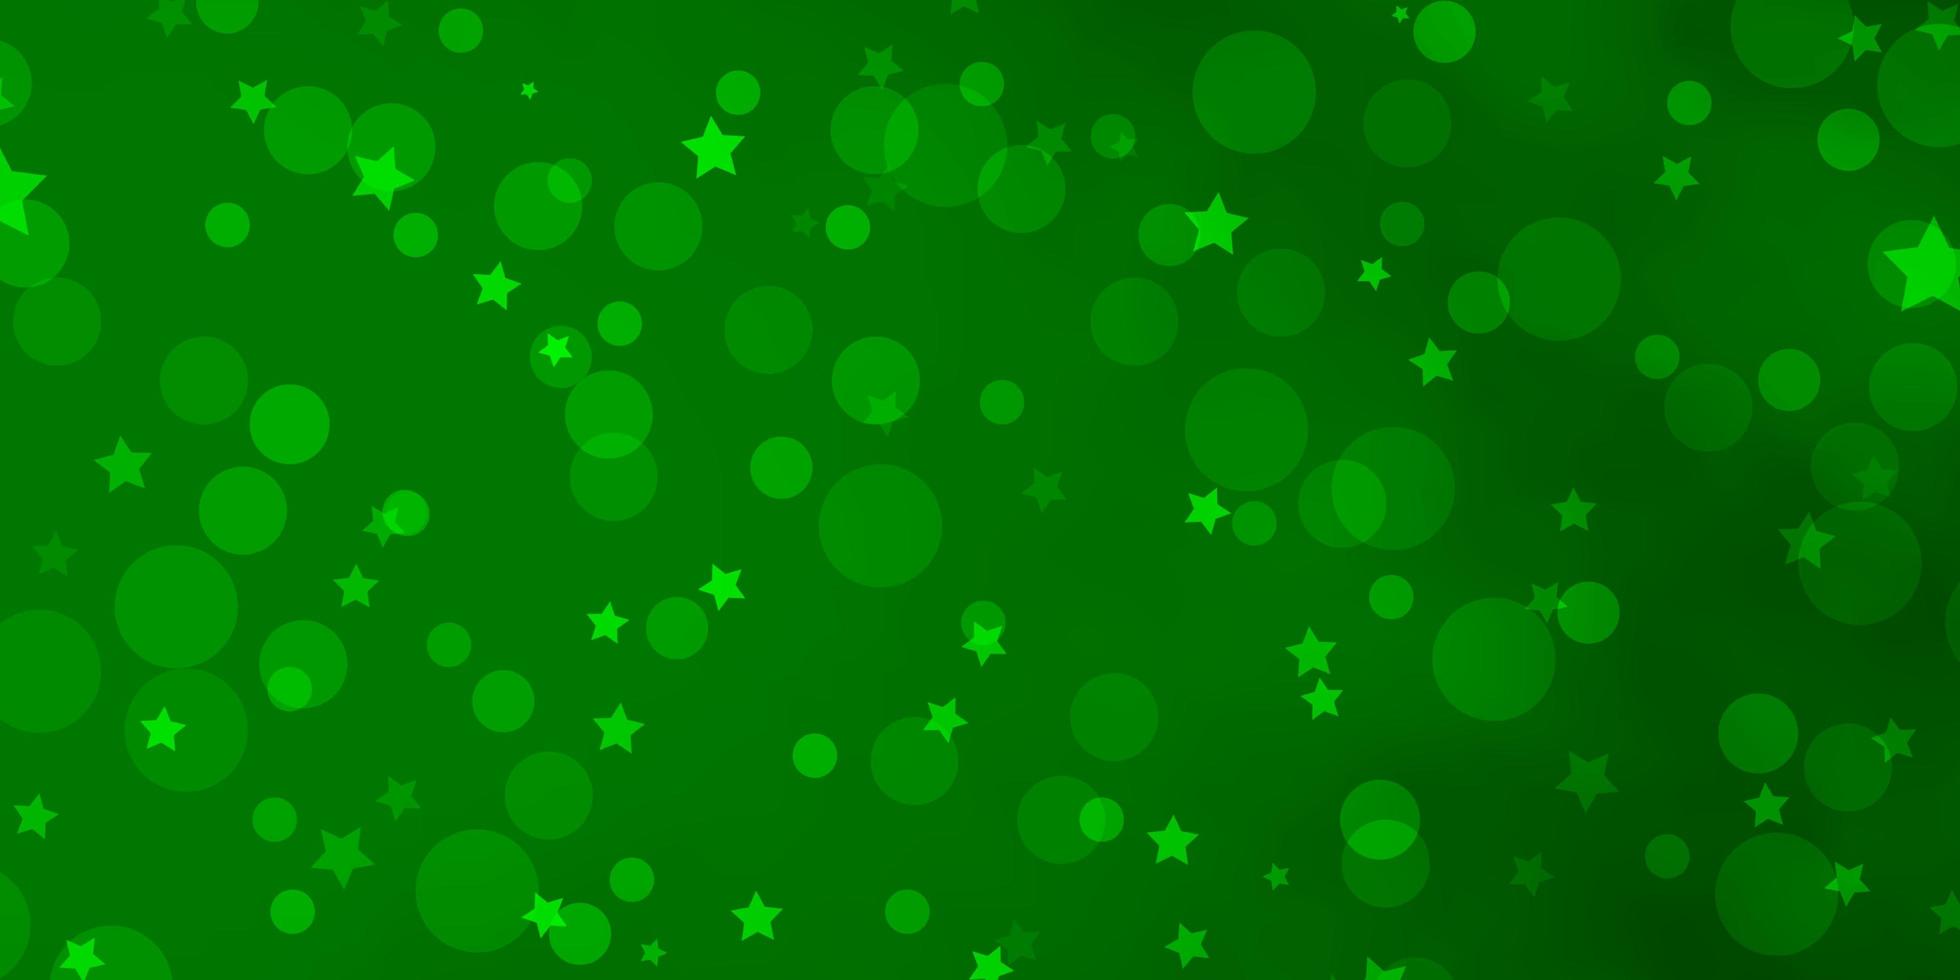 Light Green vector background with circles stars